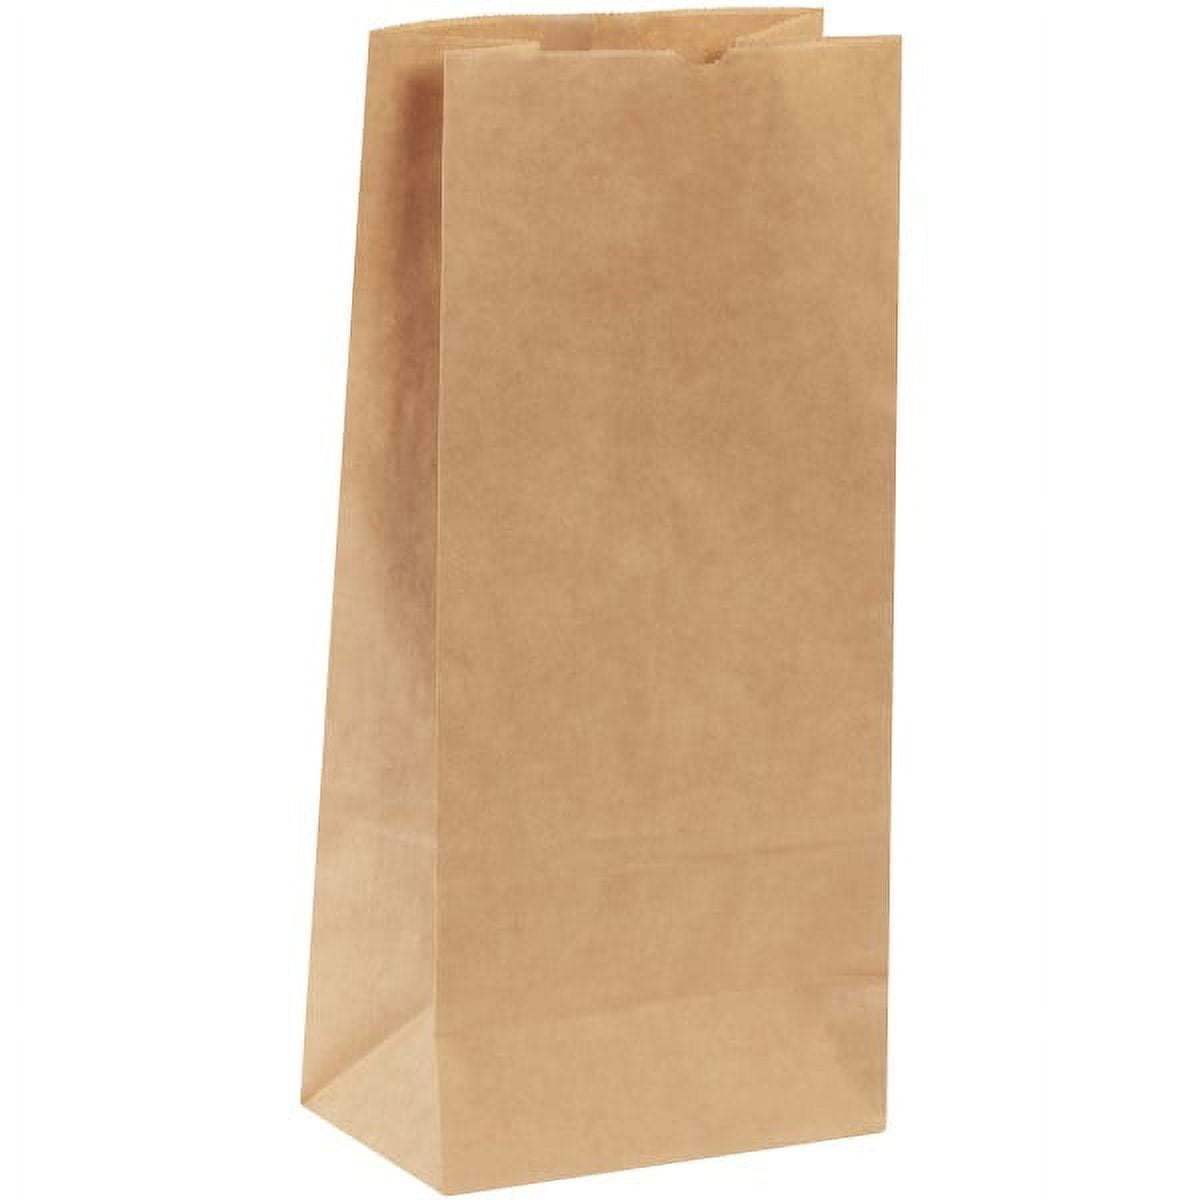 Picture of Box Partners BGH131K Kraft Hardware Bags - 8.25 x 5.25 x 18 in.